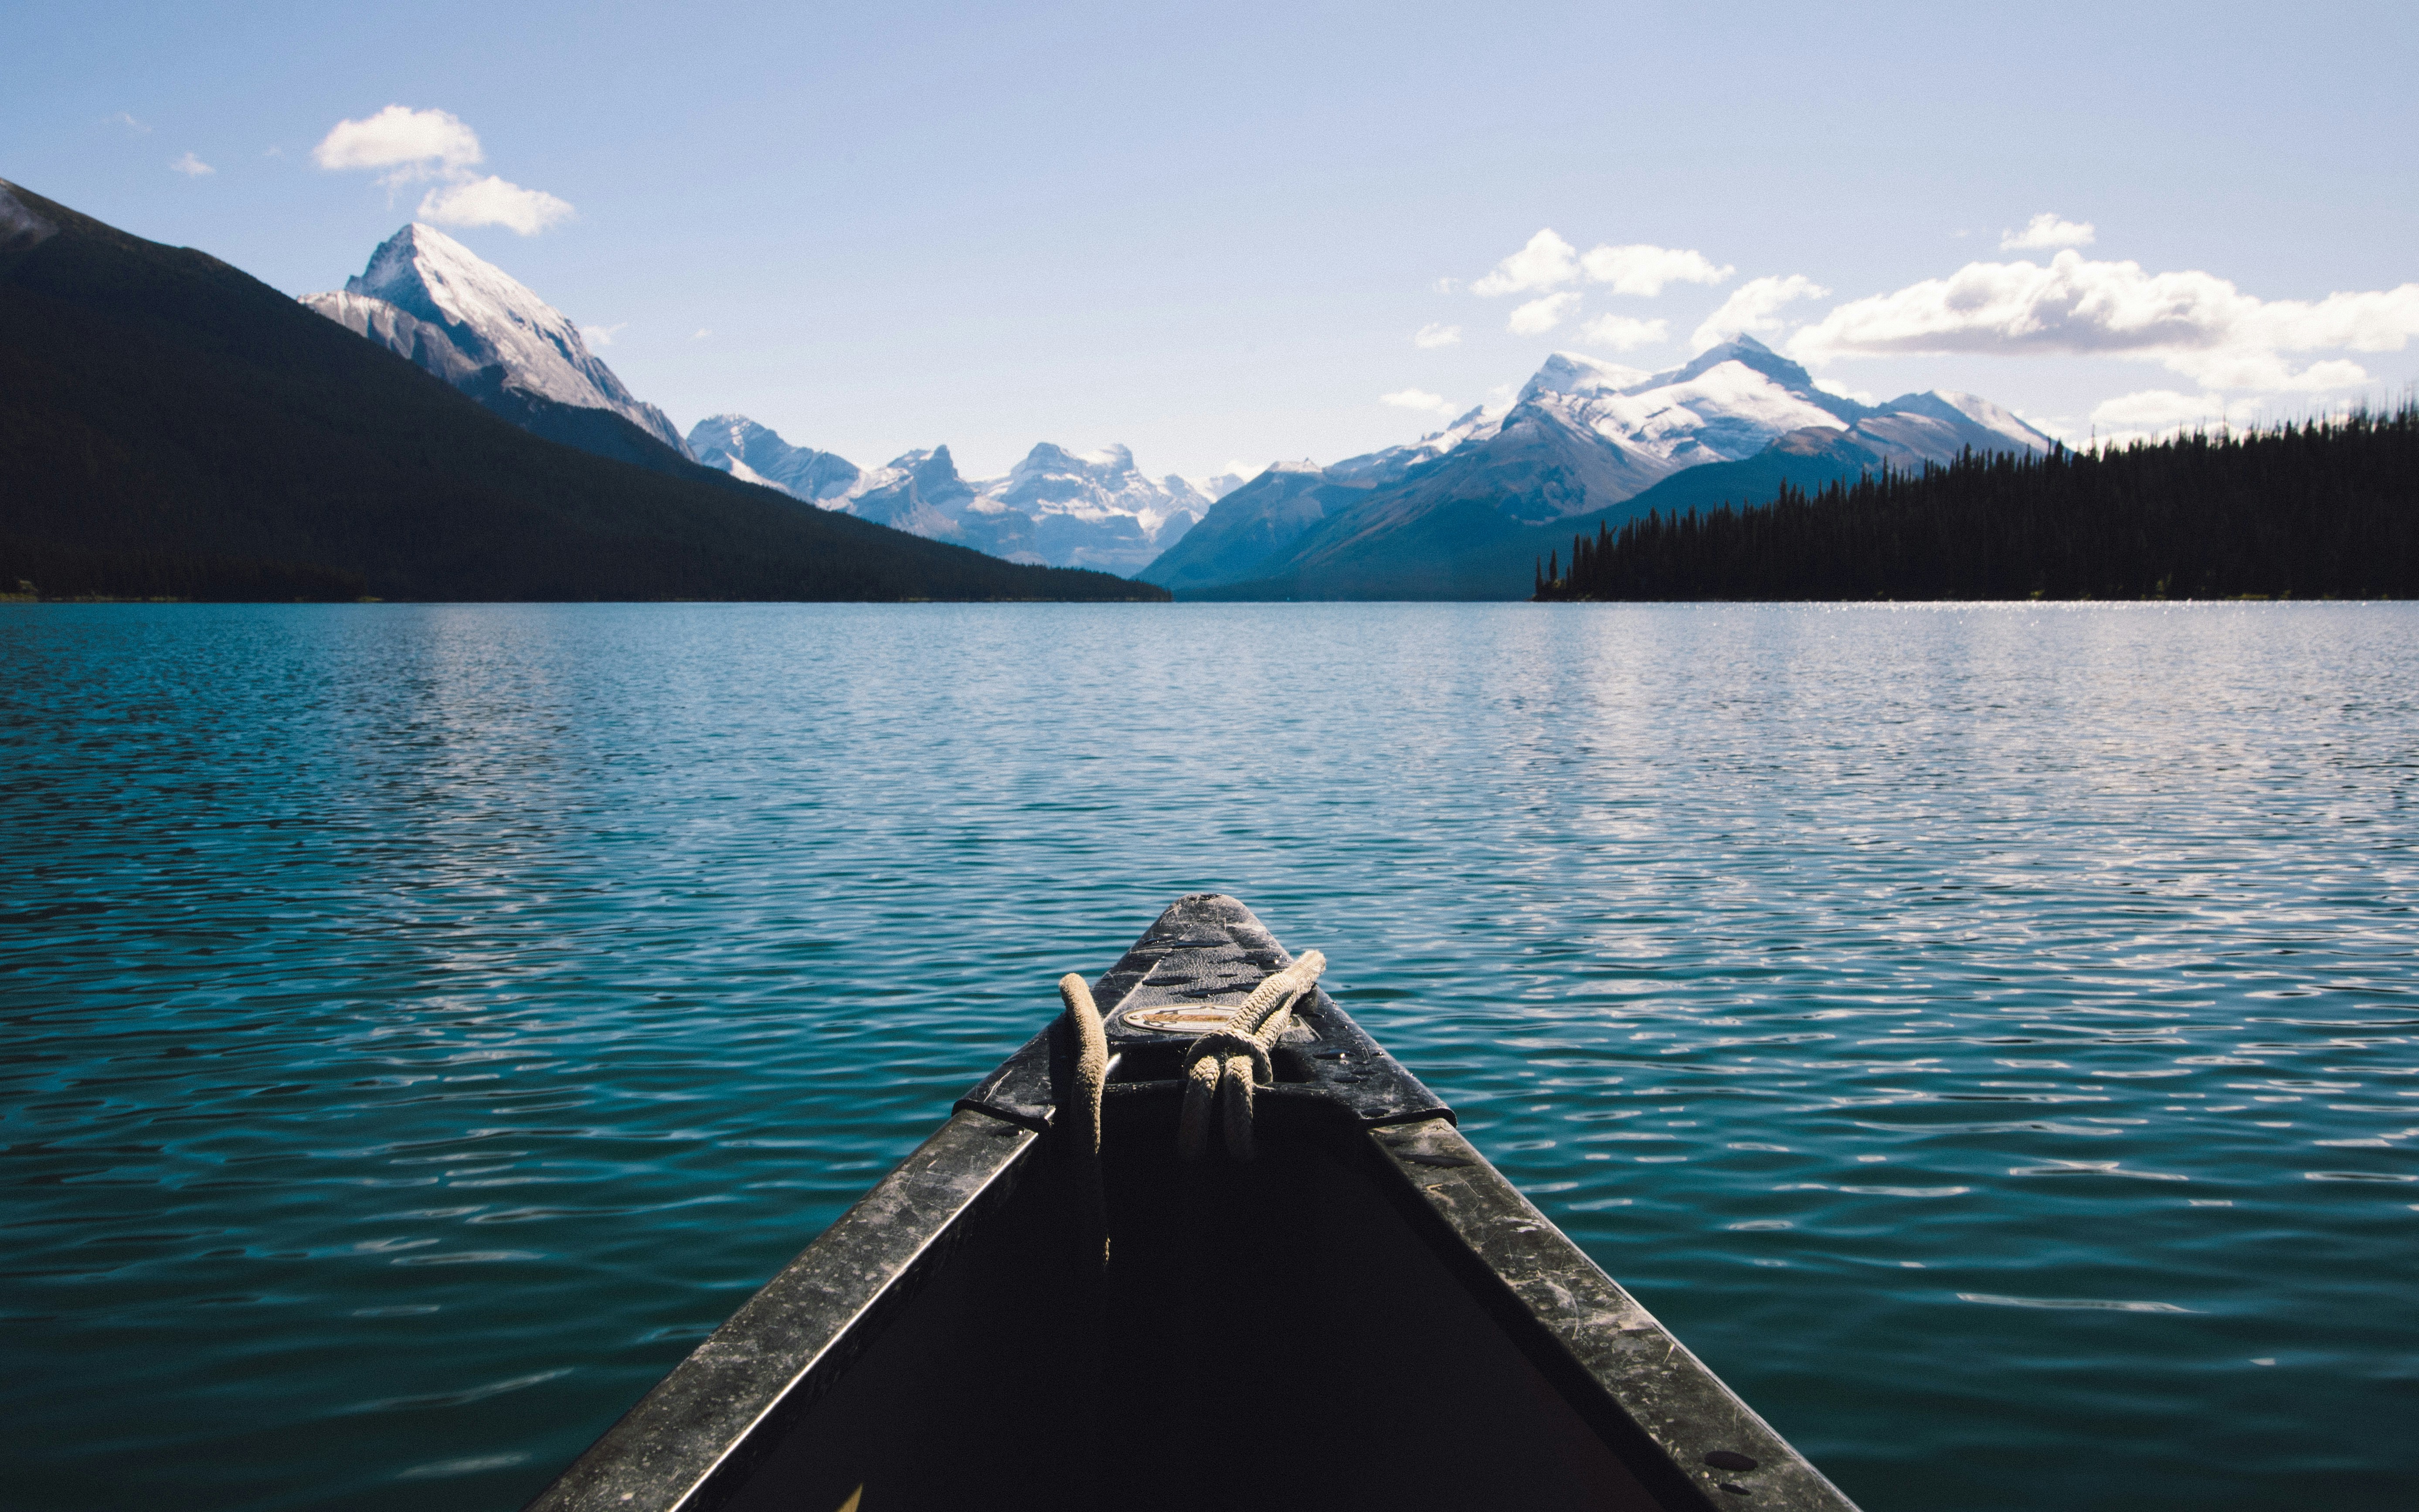 Tip of canoe over a lake